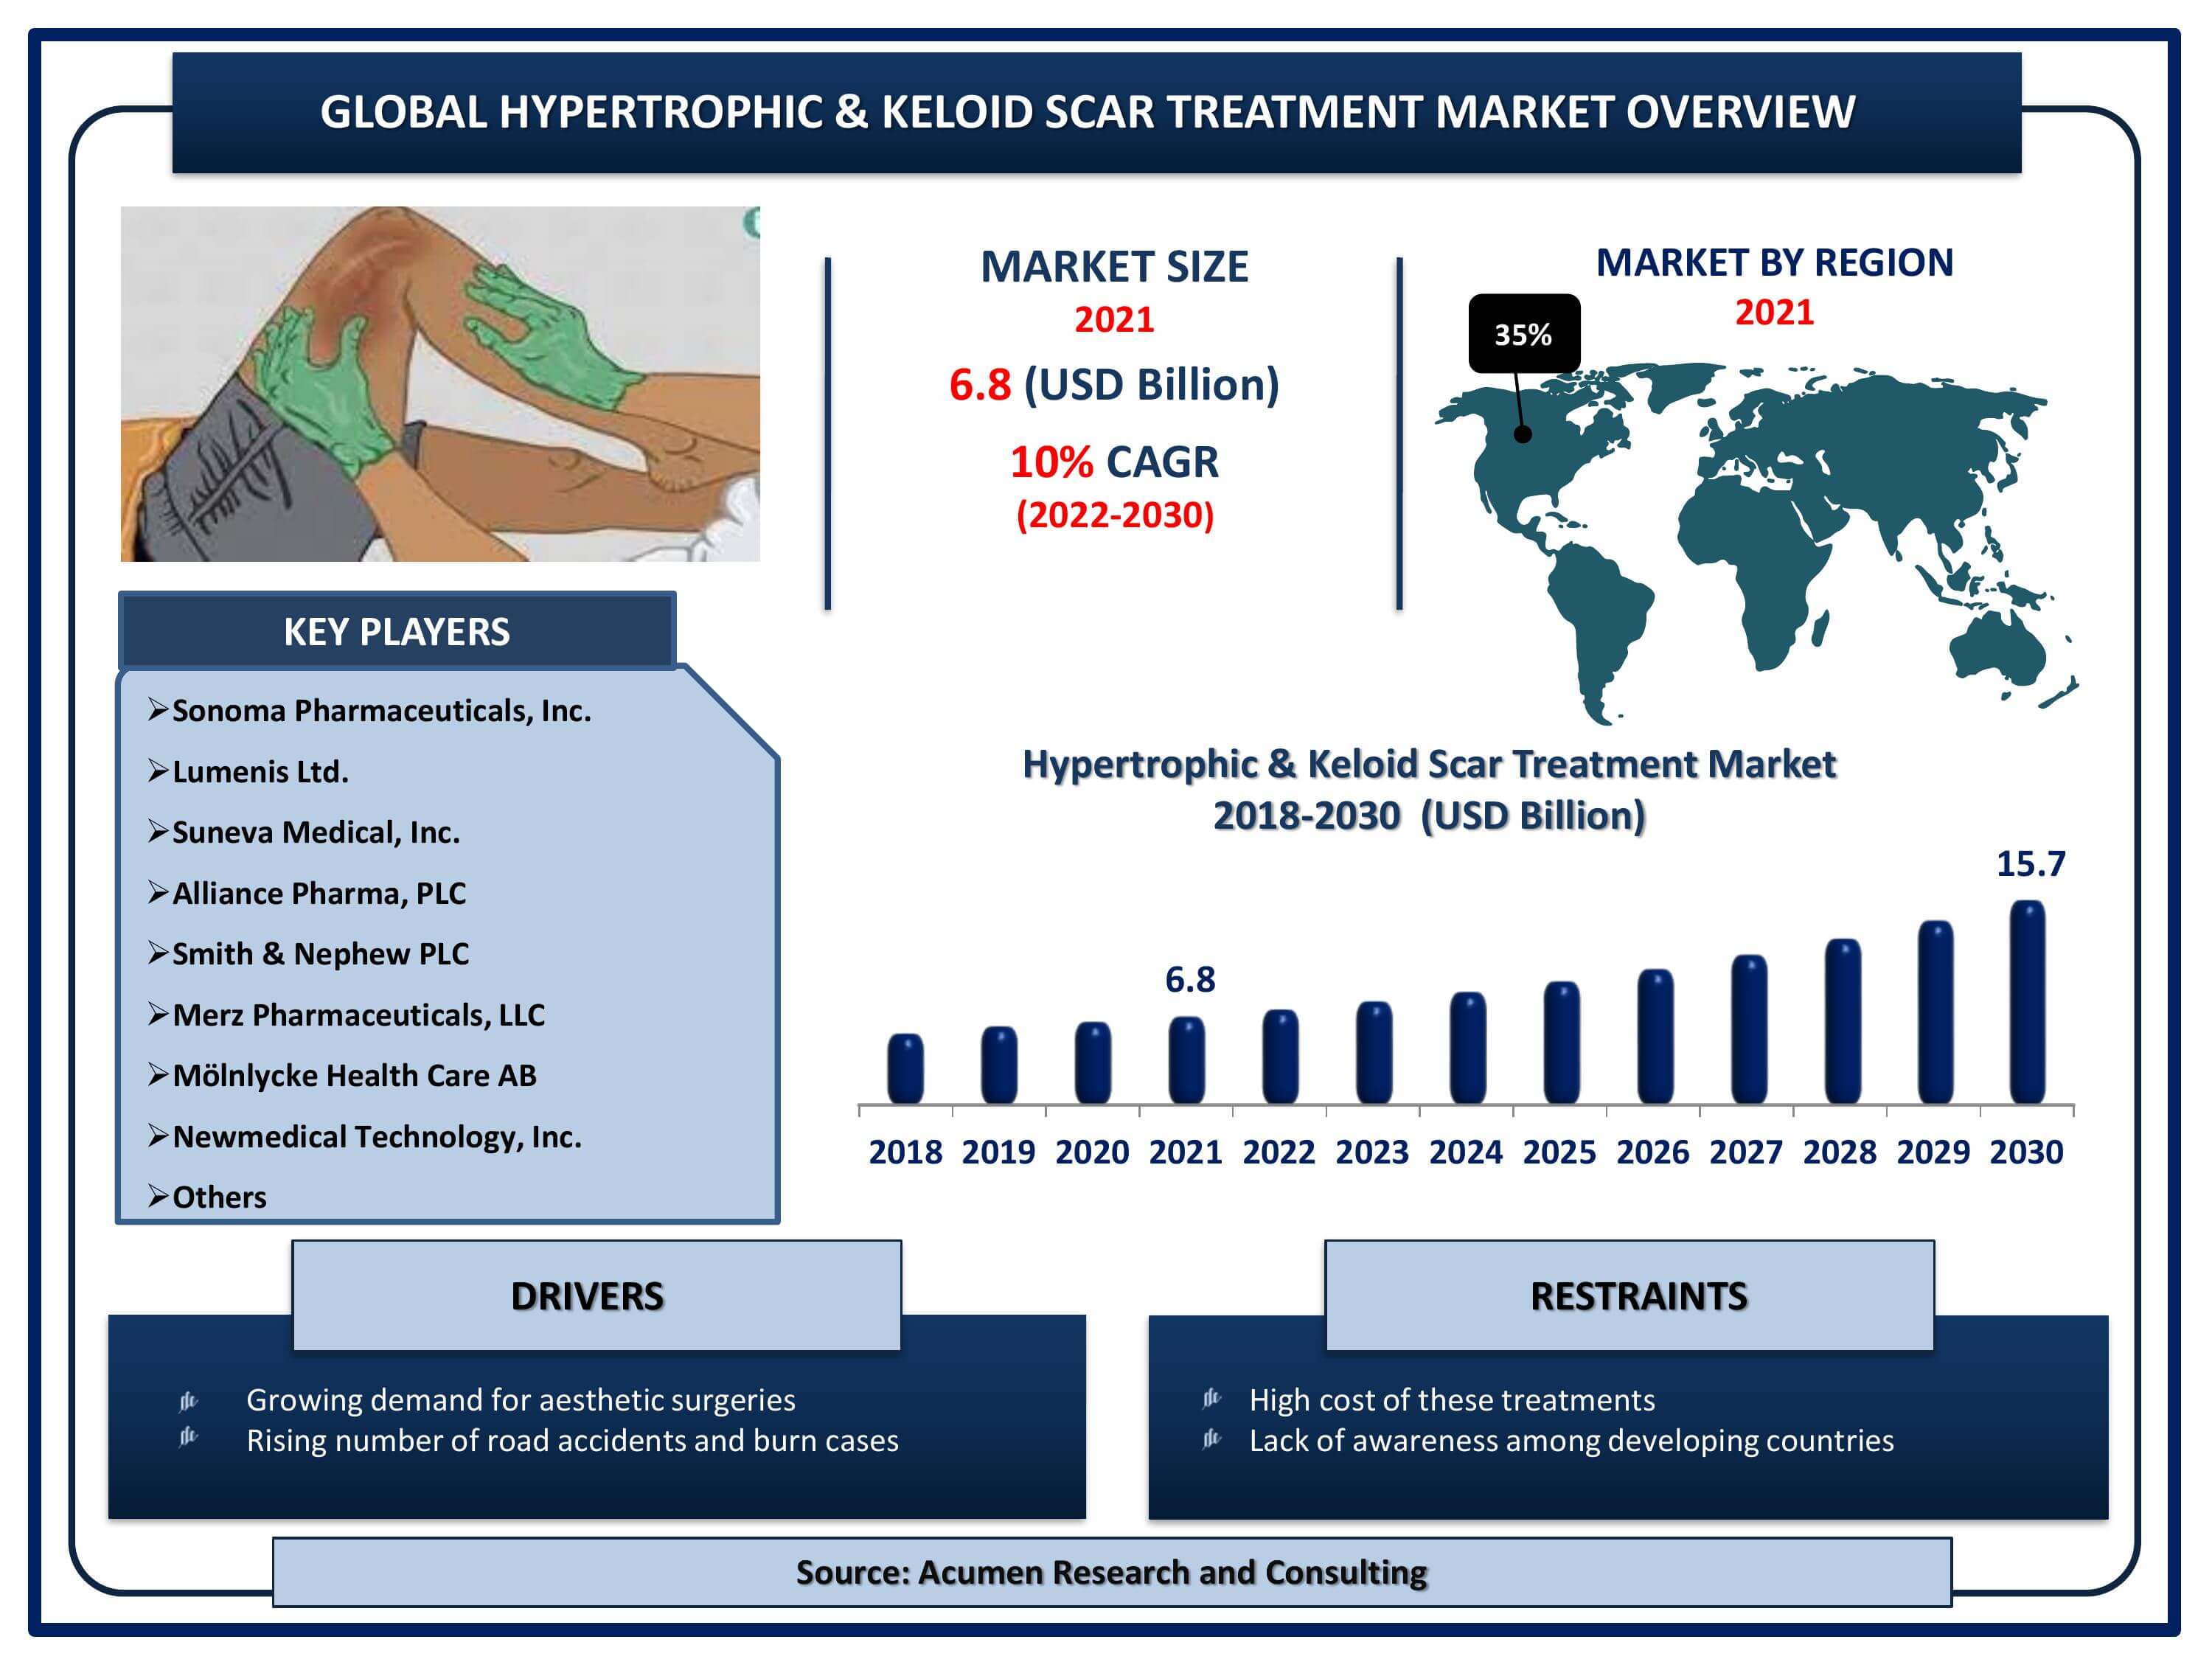 Global hypertrophic & keloid scar treatment market revenue is estimated to reach USD 15.7 Billion by 2030 with a CAGR of 10% from 2022 to 2030